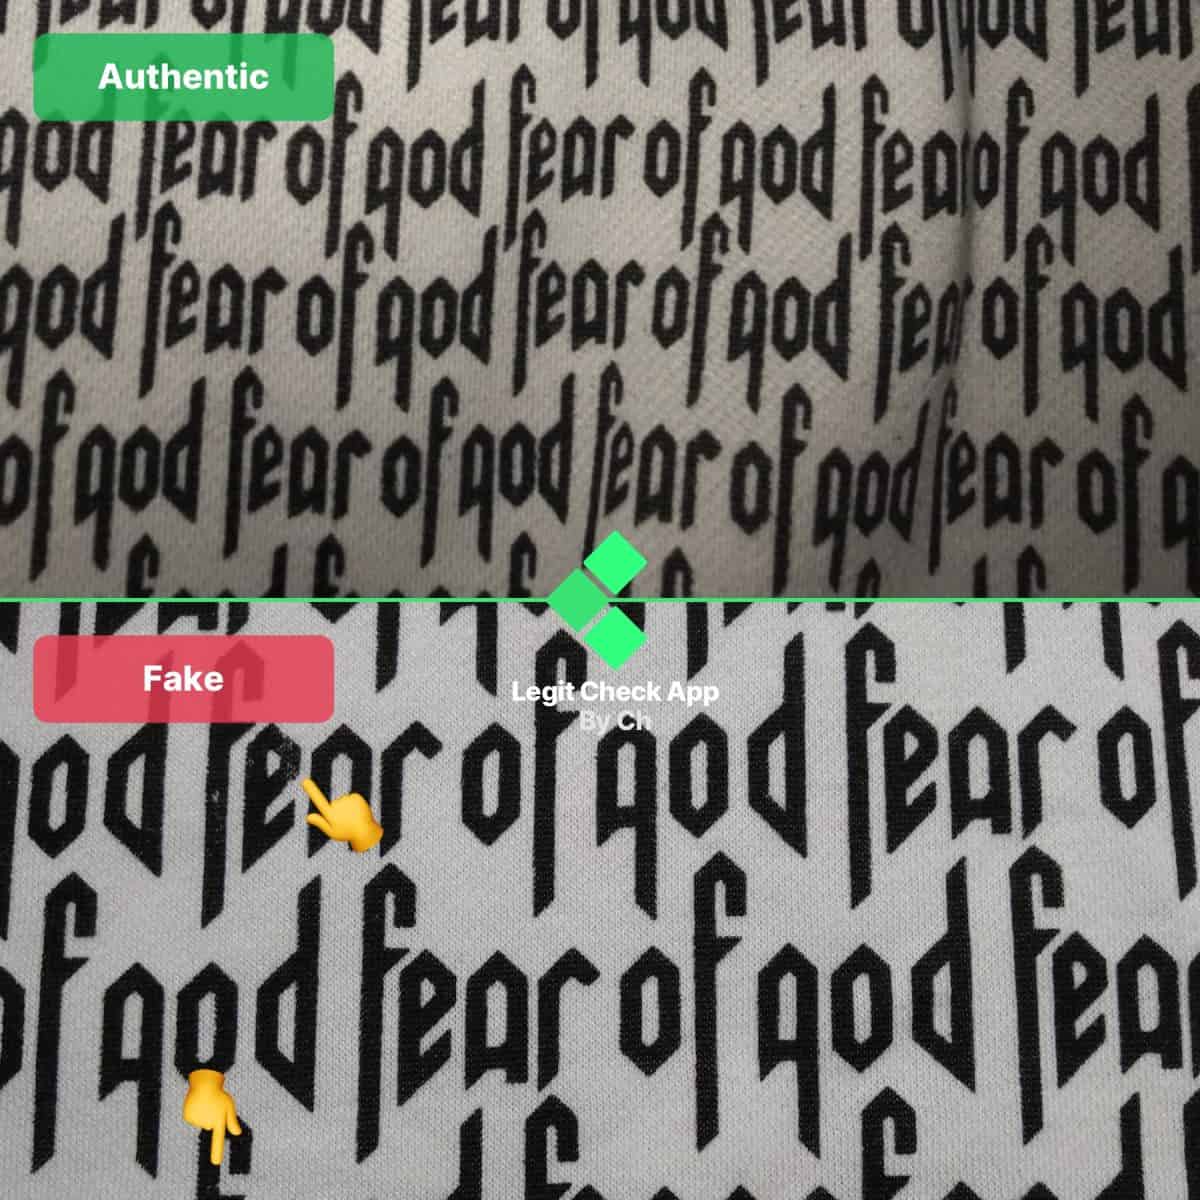 Fear of Good Hoodie Text Print